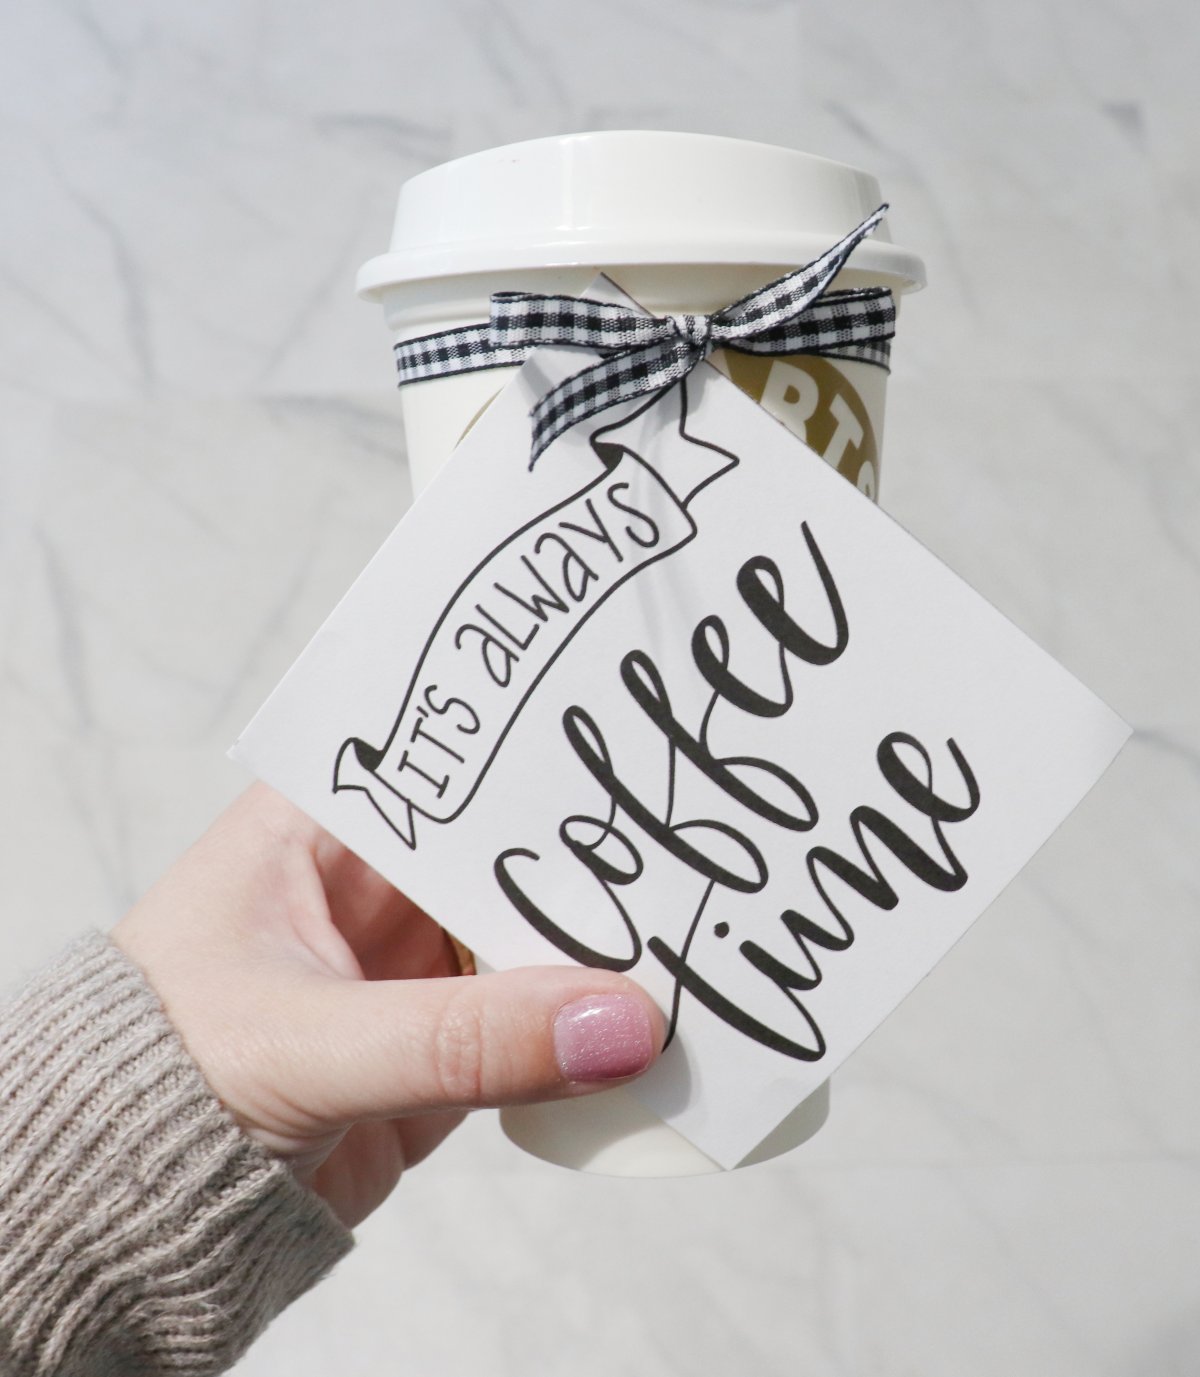 Image contains Amy's hand holding a to-go cup with a label that reads, "it's always coffee time." The label is attached with black and white ribbon tied in a bow.